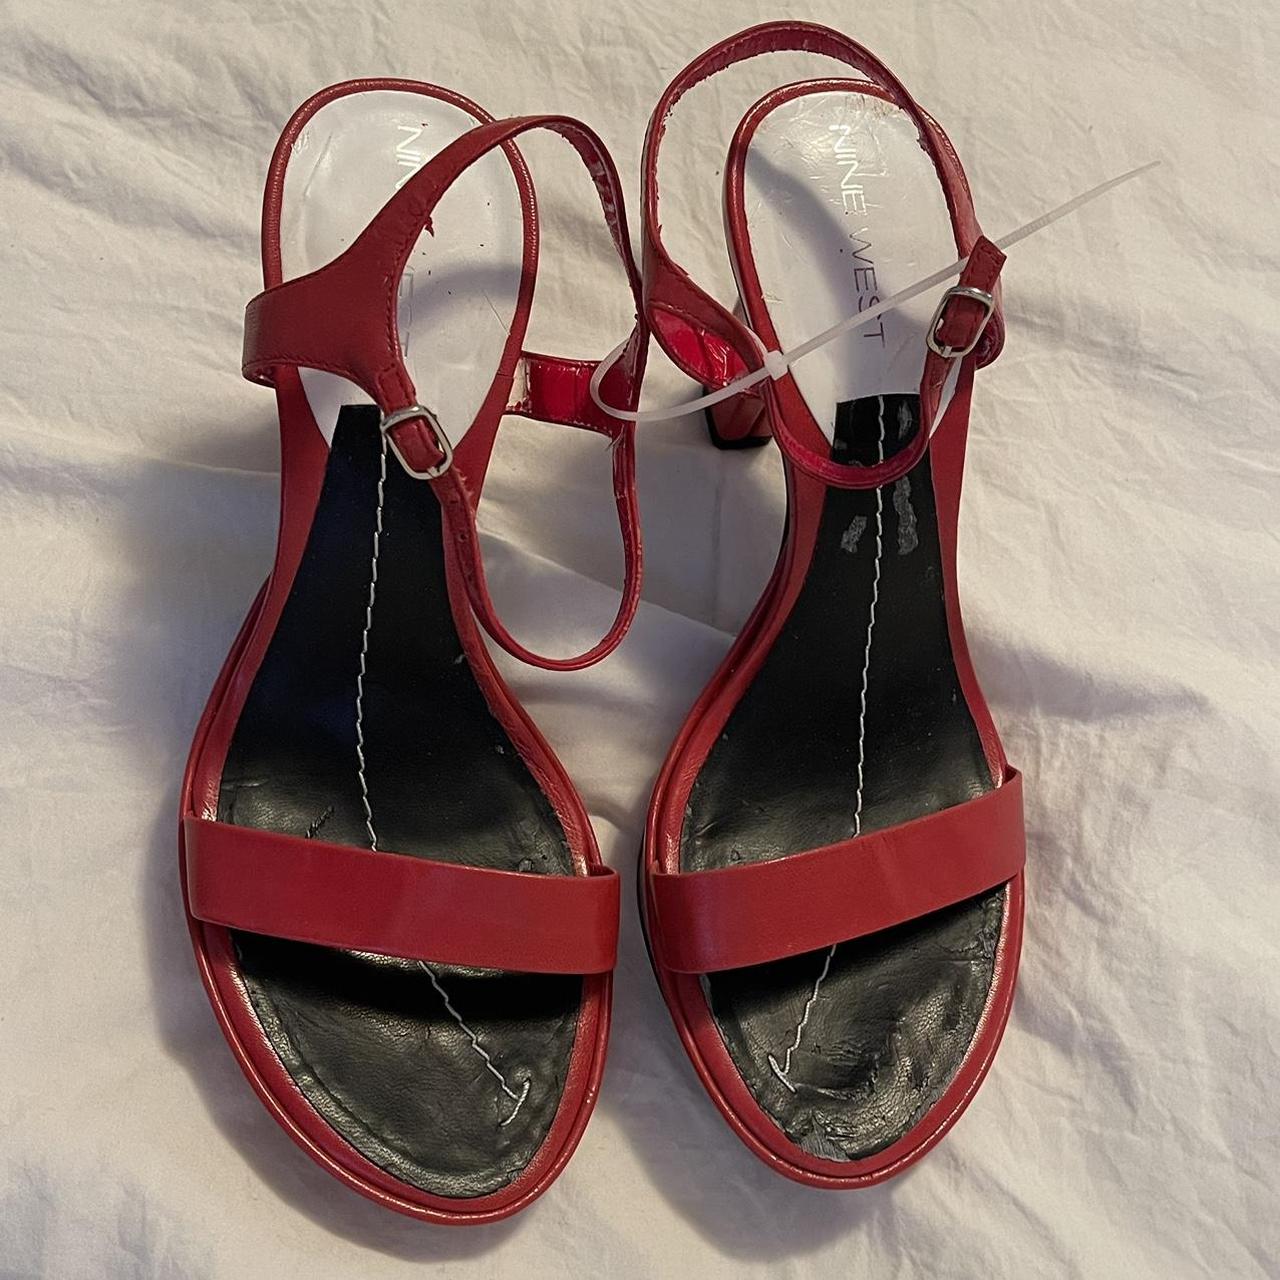 Nine West Women's Red and Burgundy Courts | Depop